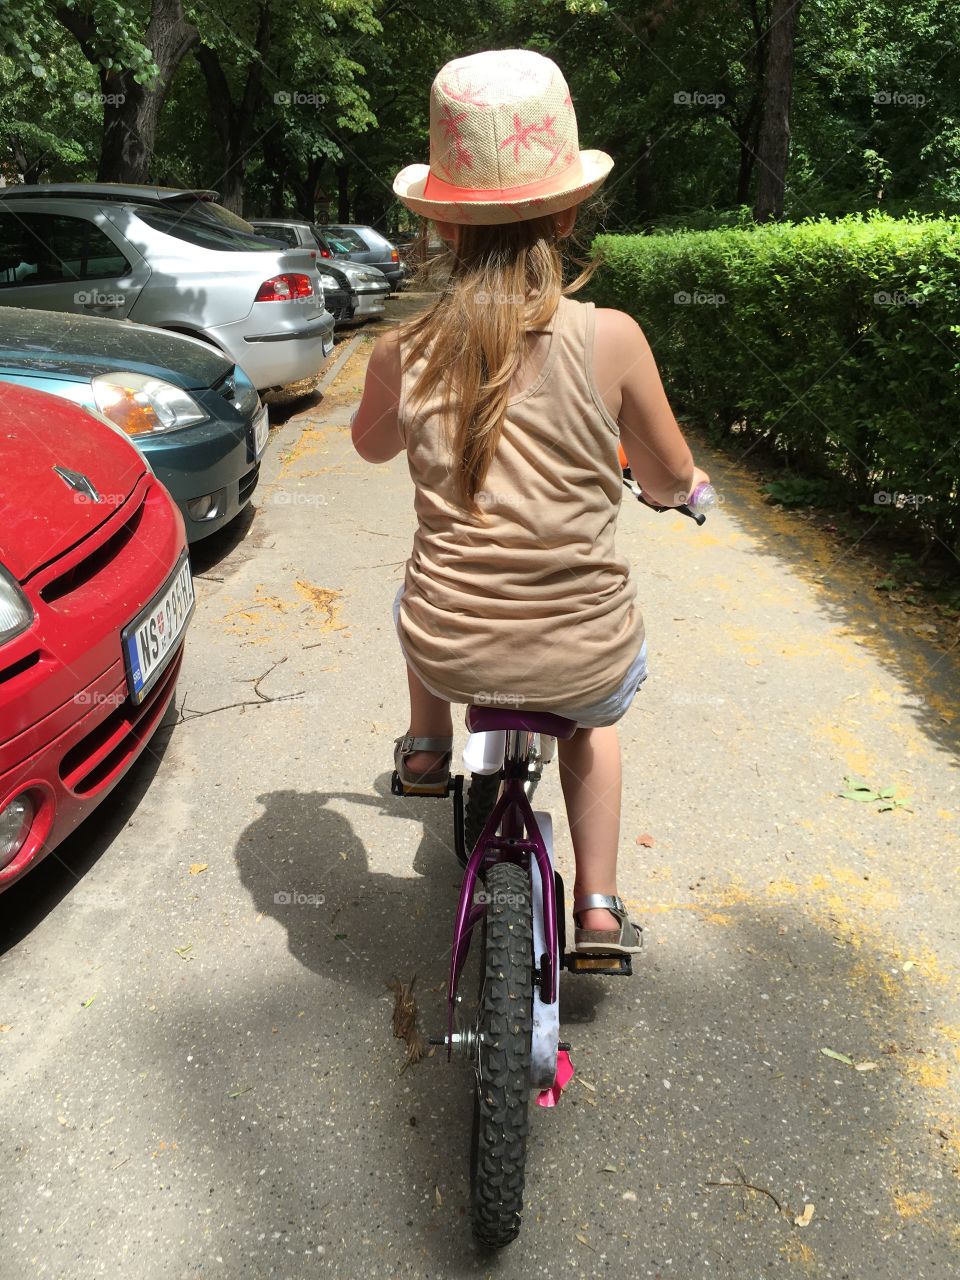 Little girl wearing hat on a hot summer day riding a bike